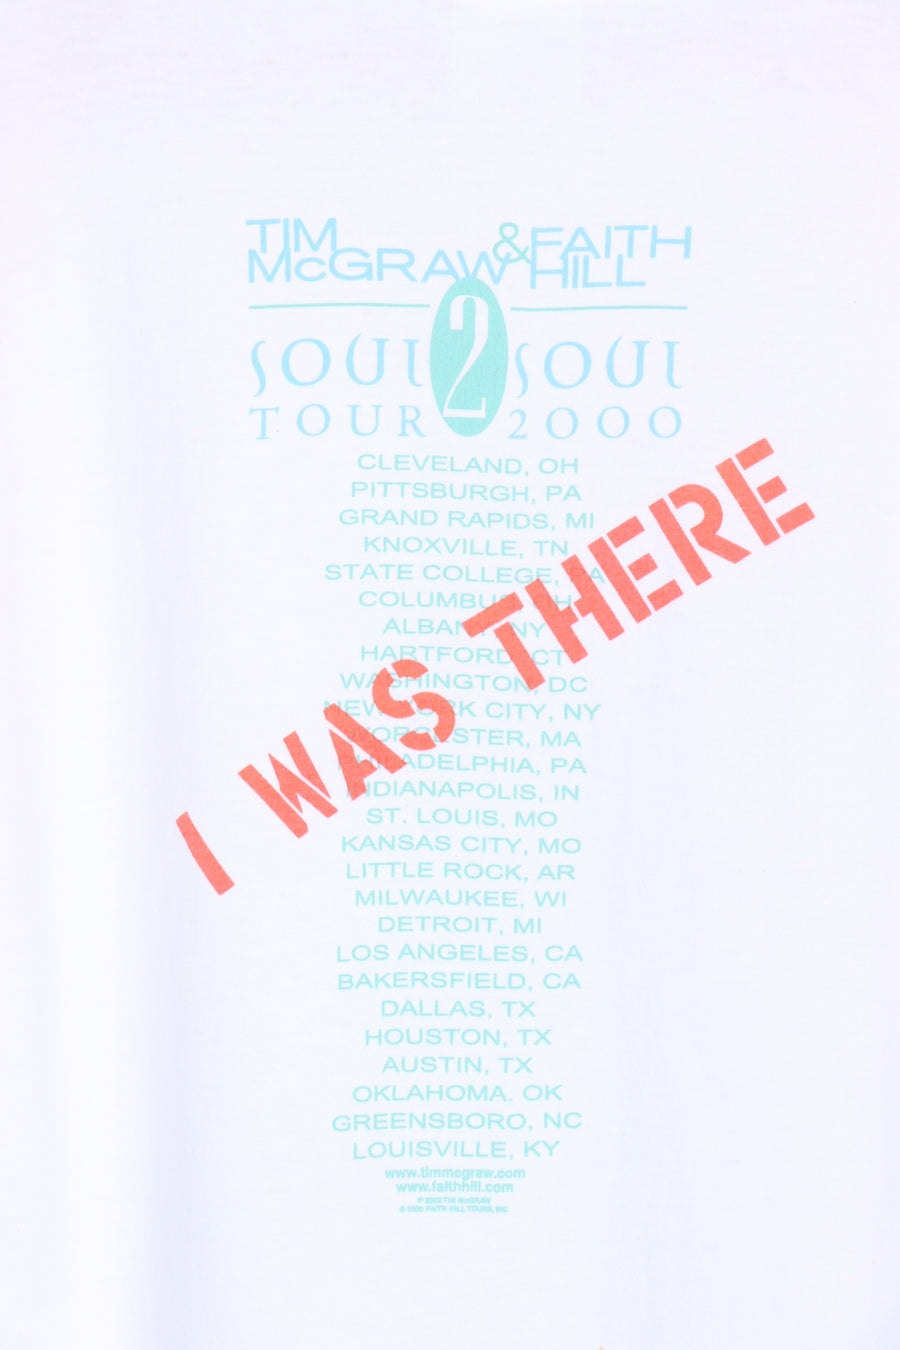 Tim McGraw & Faith Hill 'I Was There!' Tour Band Merch T-Shirt (M-L)